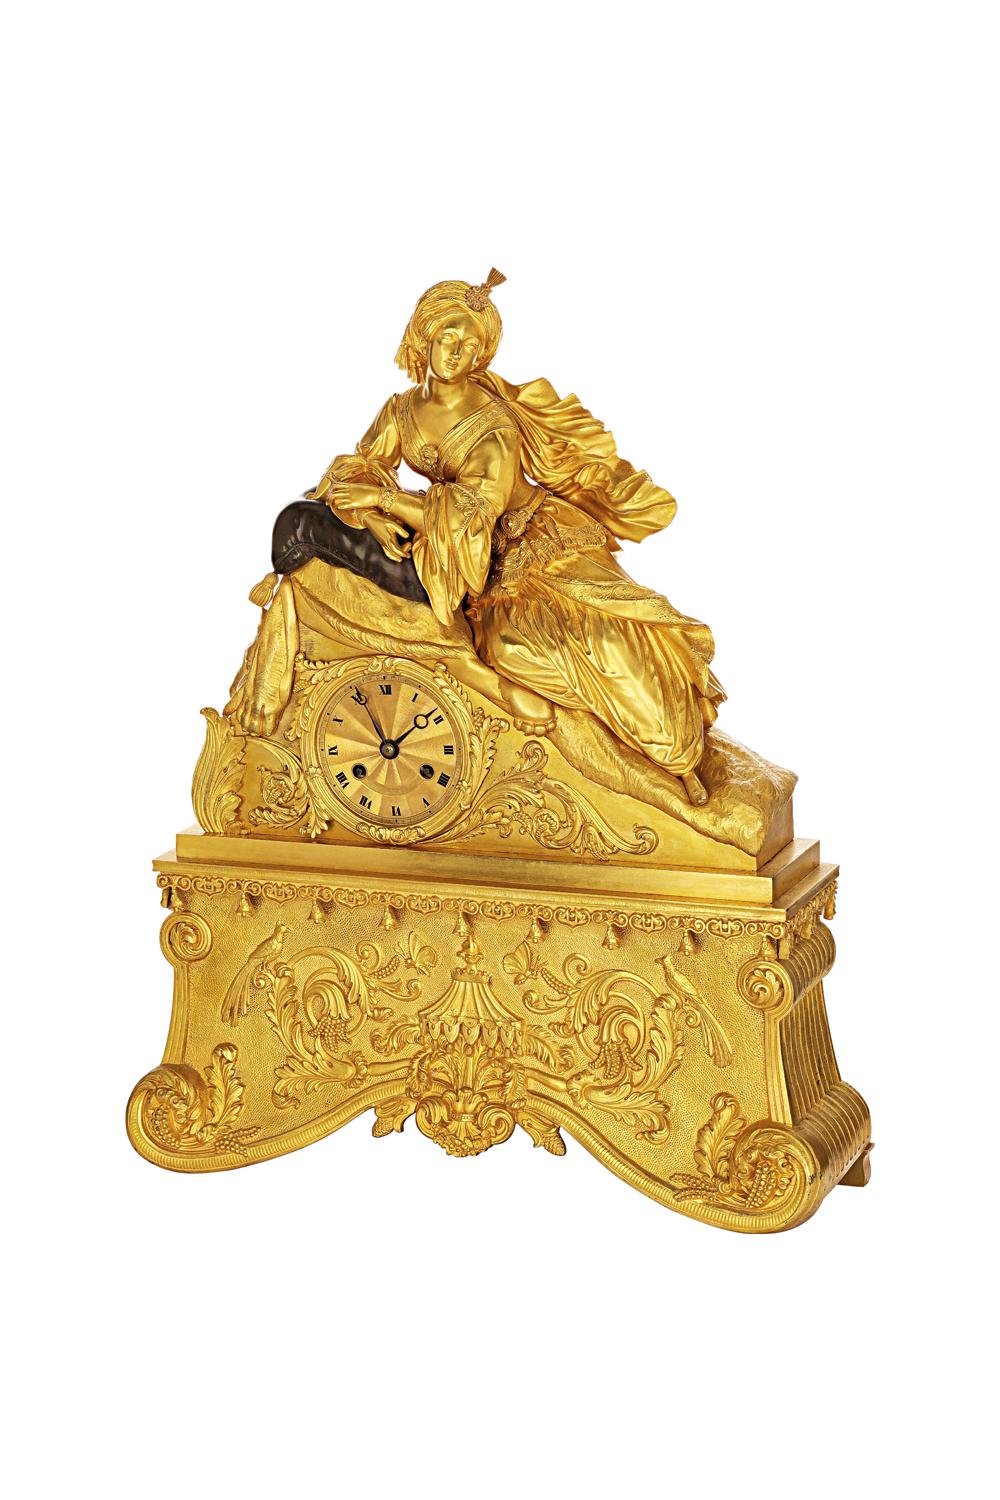 Mantel clock with the figure of a young noble Turkish woman